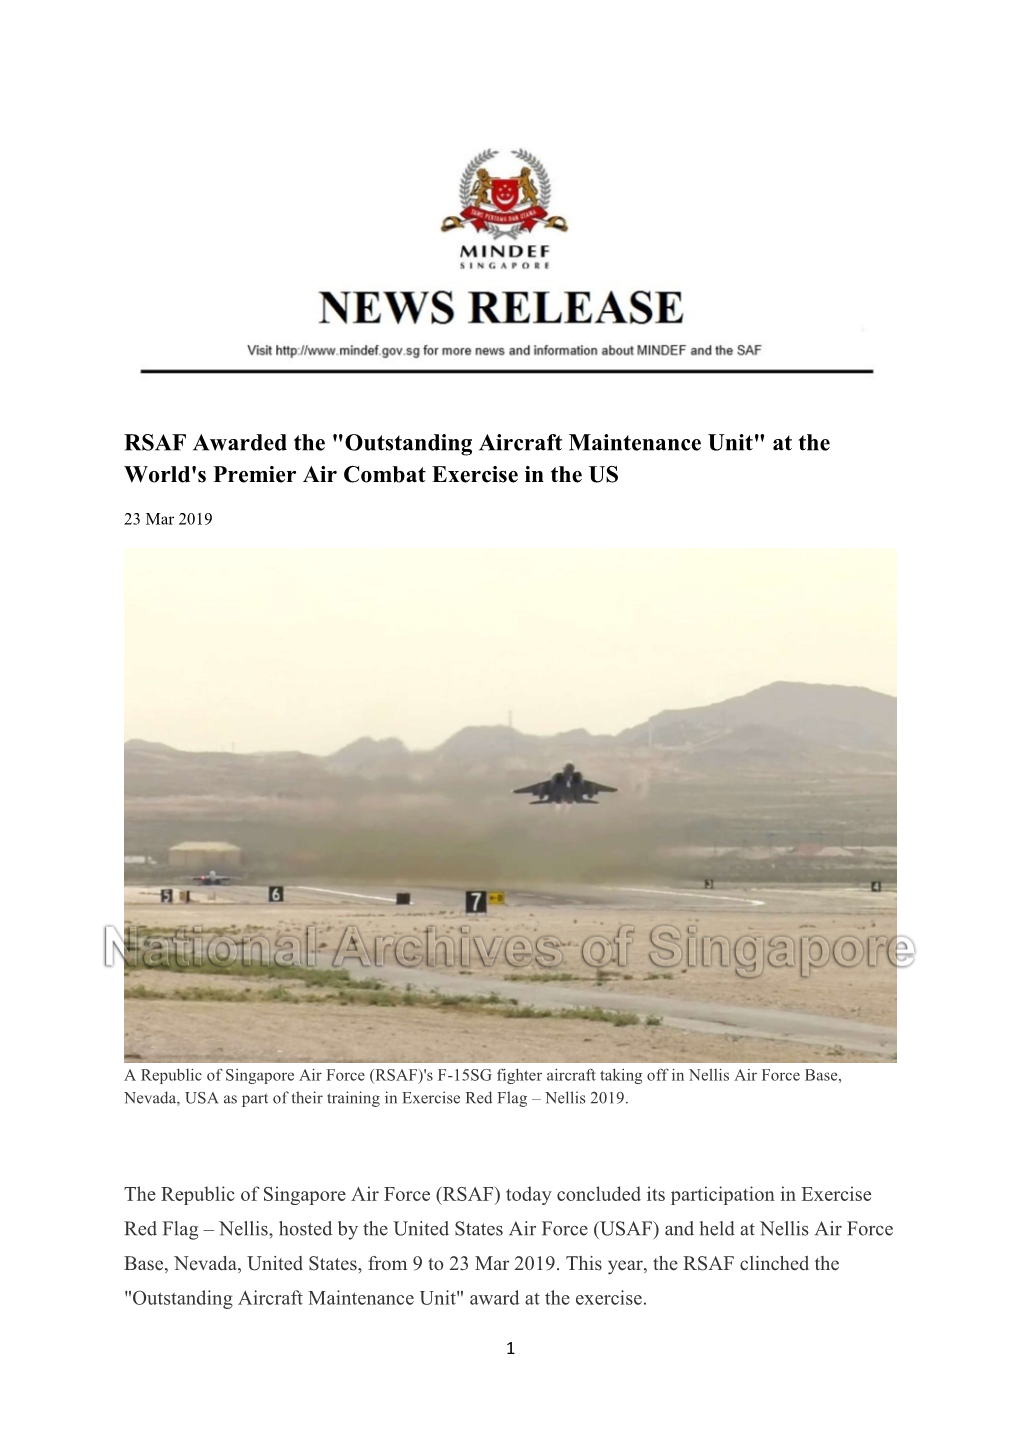 RSAF Awarded the "Outstanding Aircraft Maintenance Unit" at the World's Premier Air Combat Exercise in the US